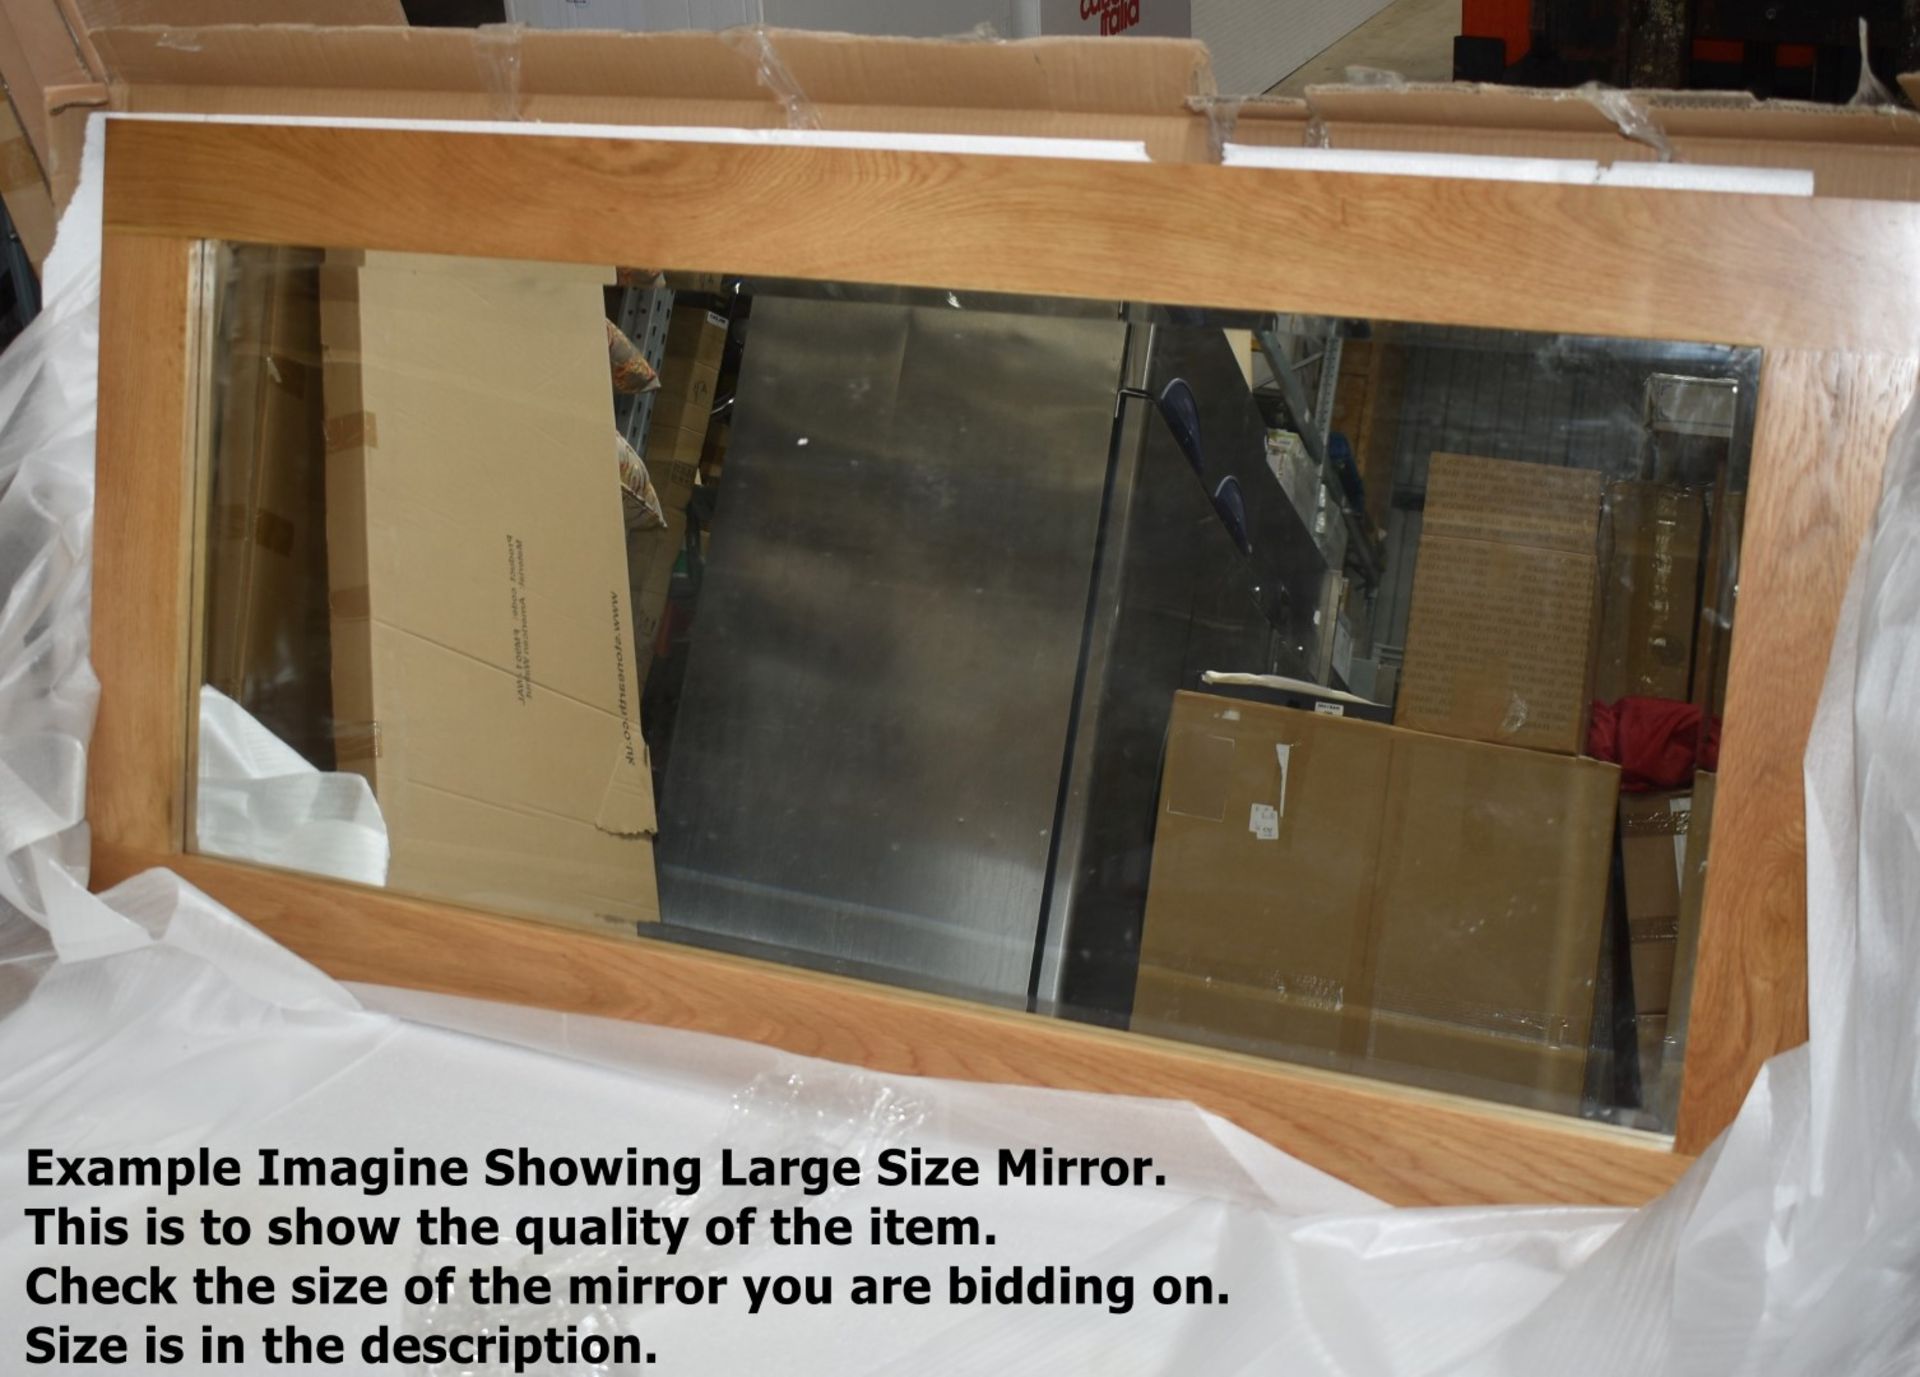 1 x Stonearth Medium Wall Mirror Frame - American Solid Oak Frame For Mirrors or Pictures - Image 3 of 12